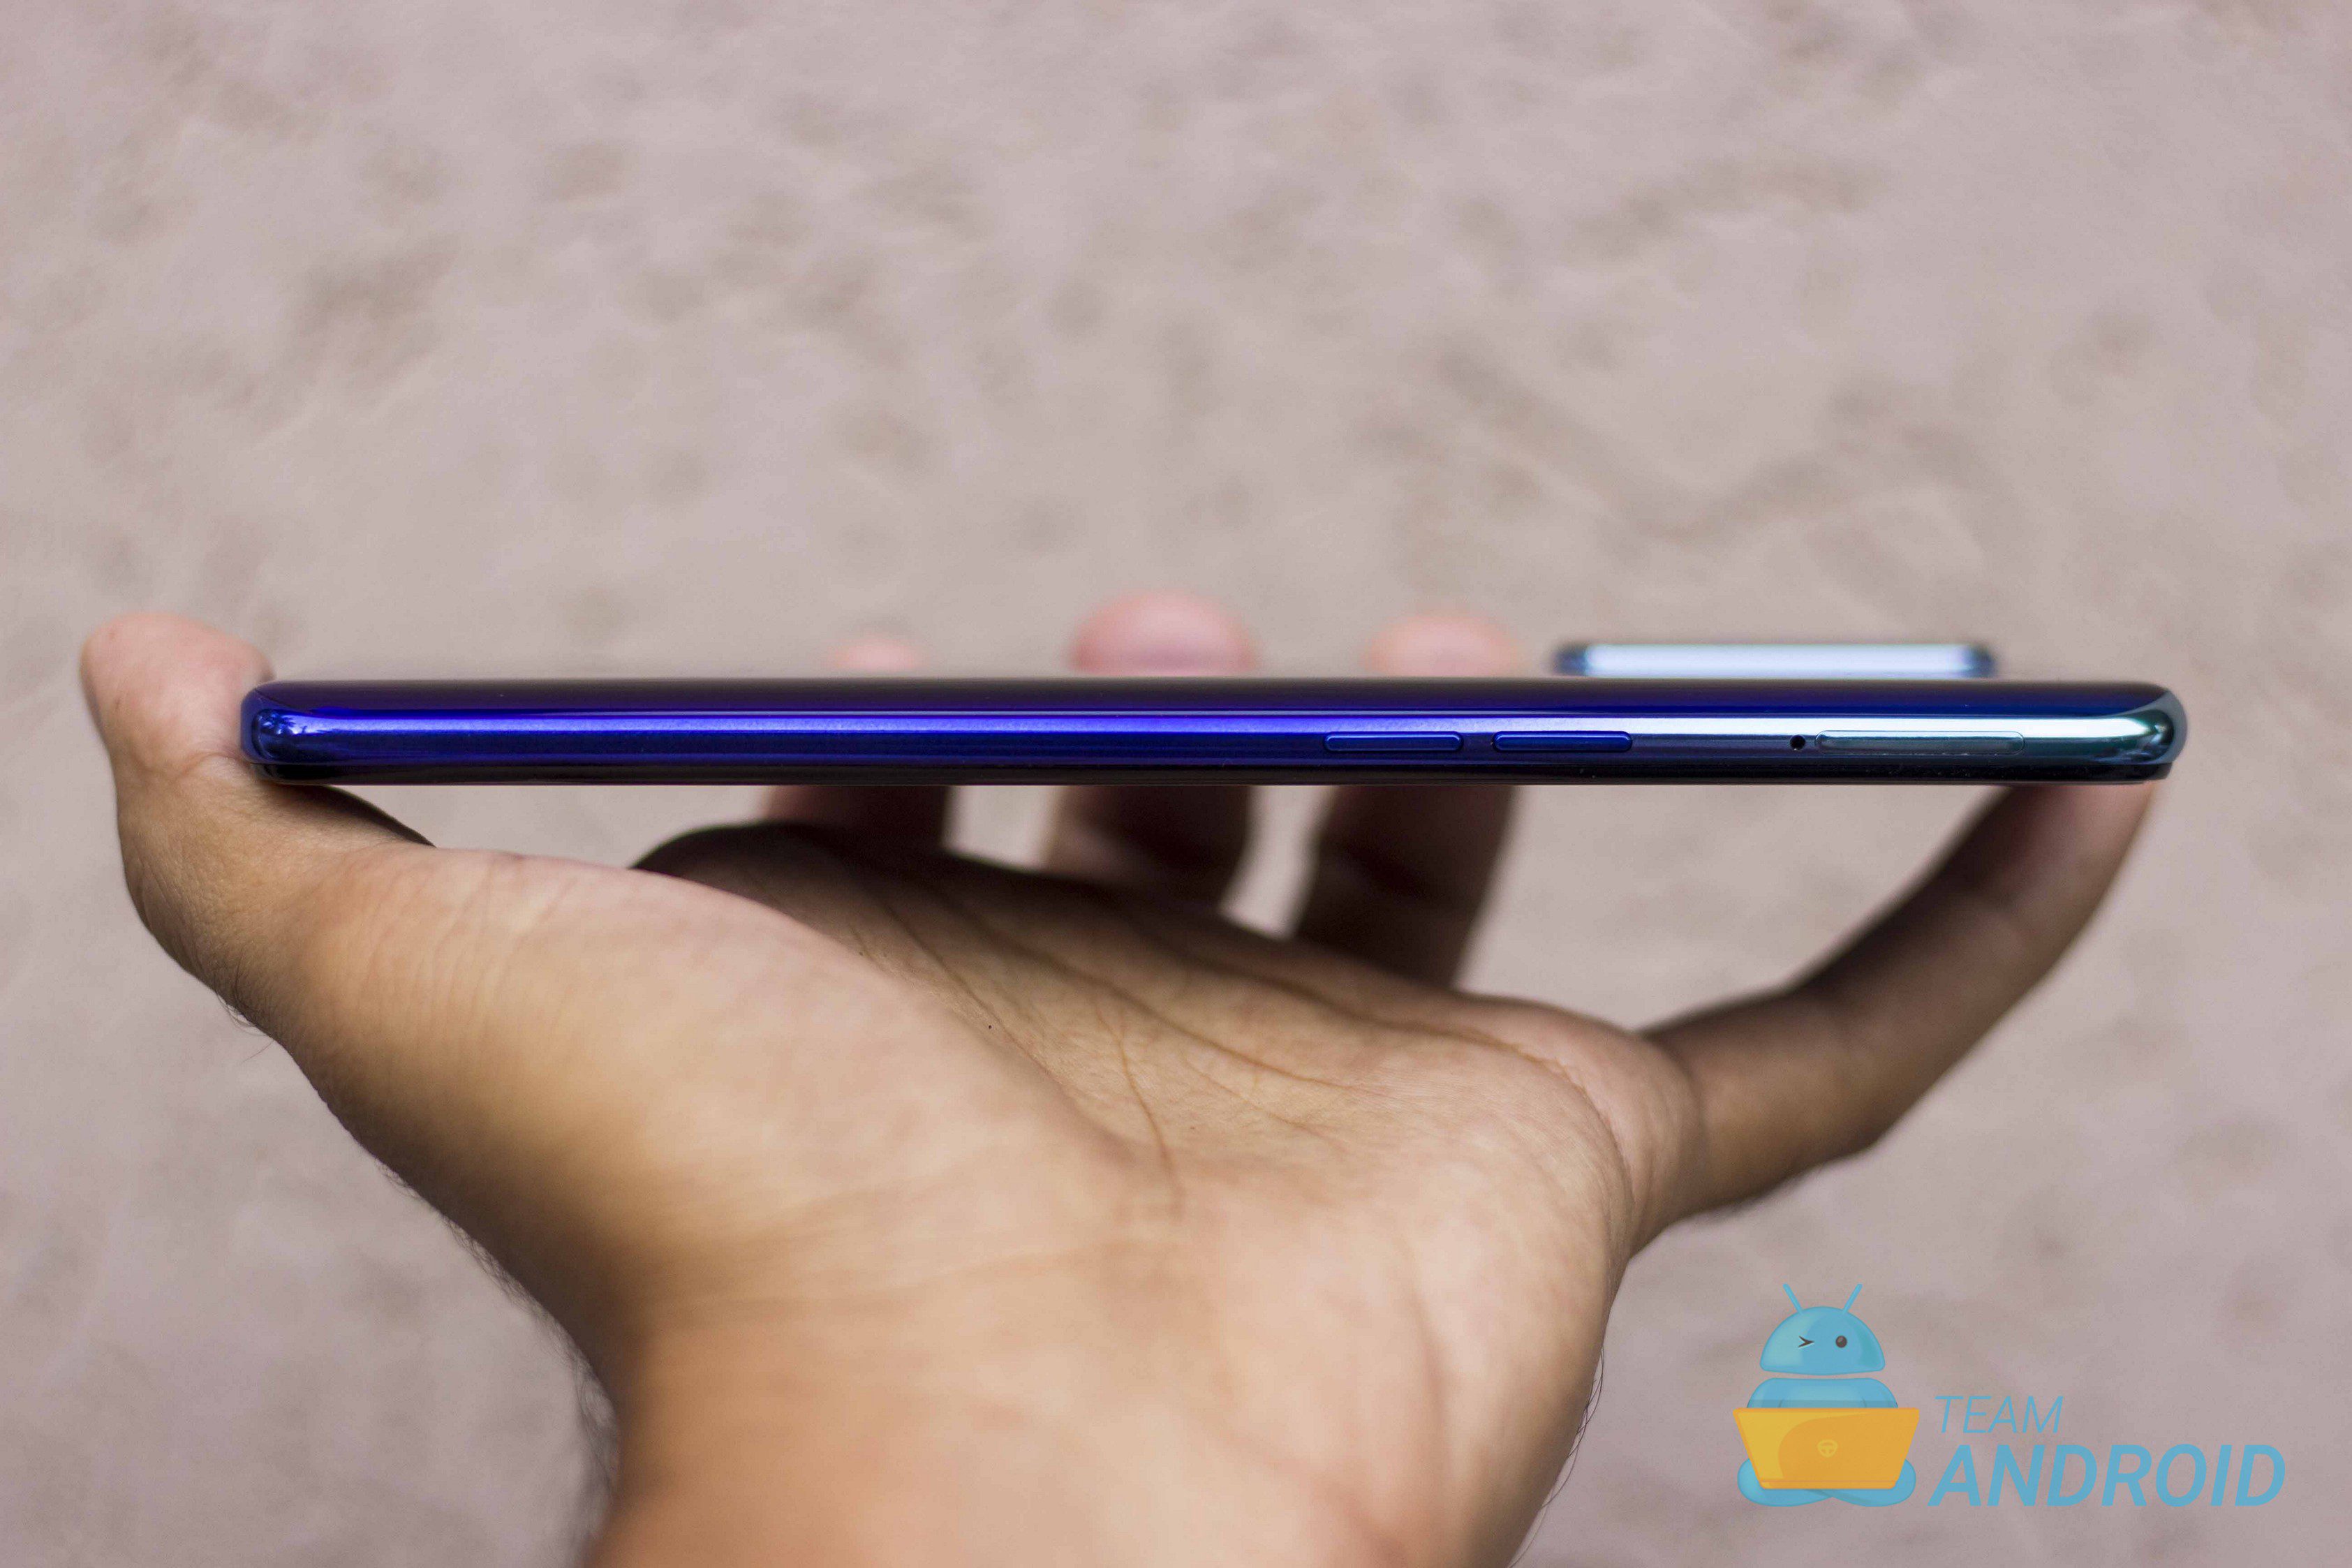 Oppo Reno 3 Pro Review: Is This a Midrange Flagship Phone? 6